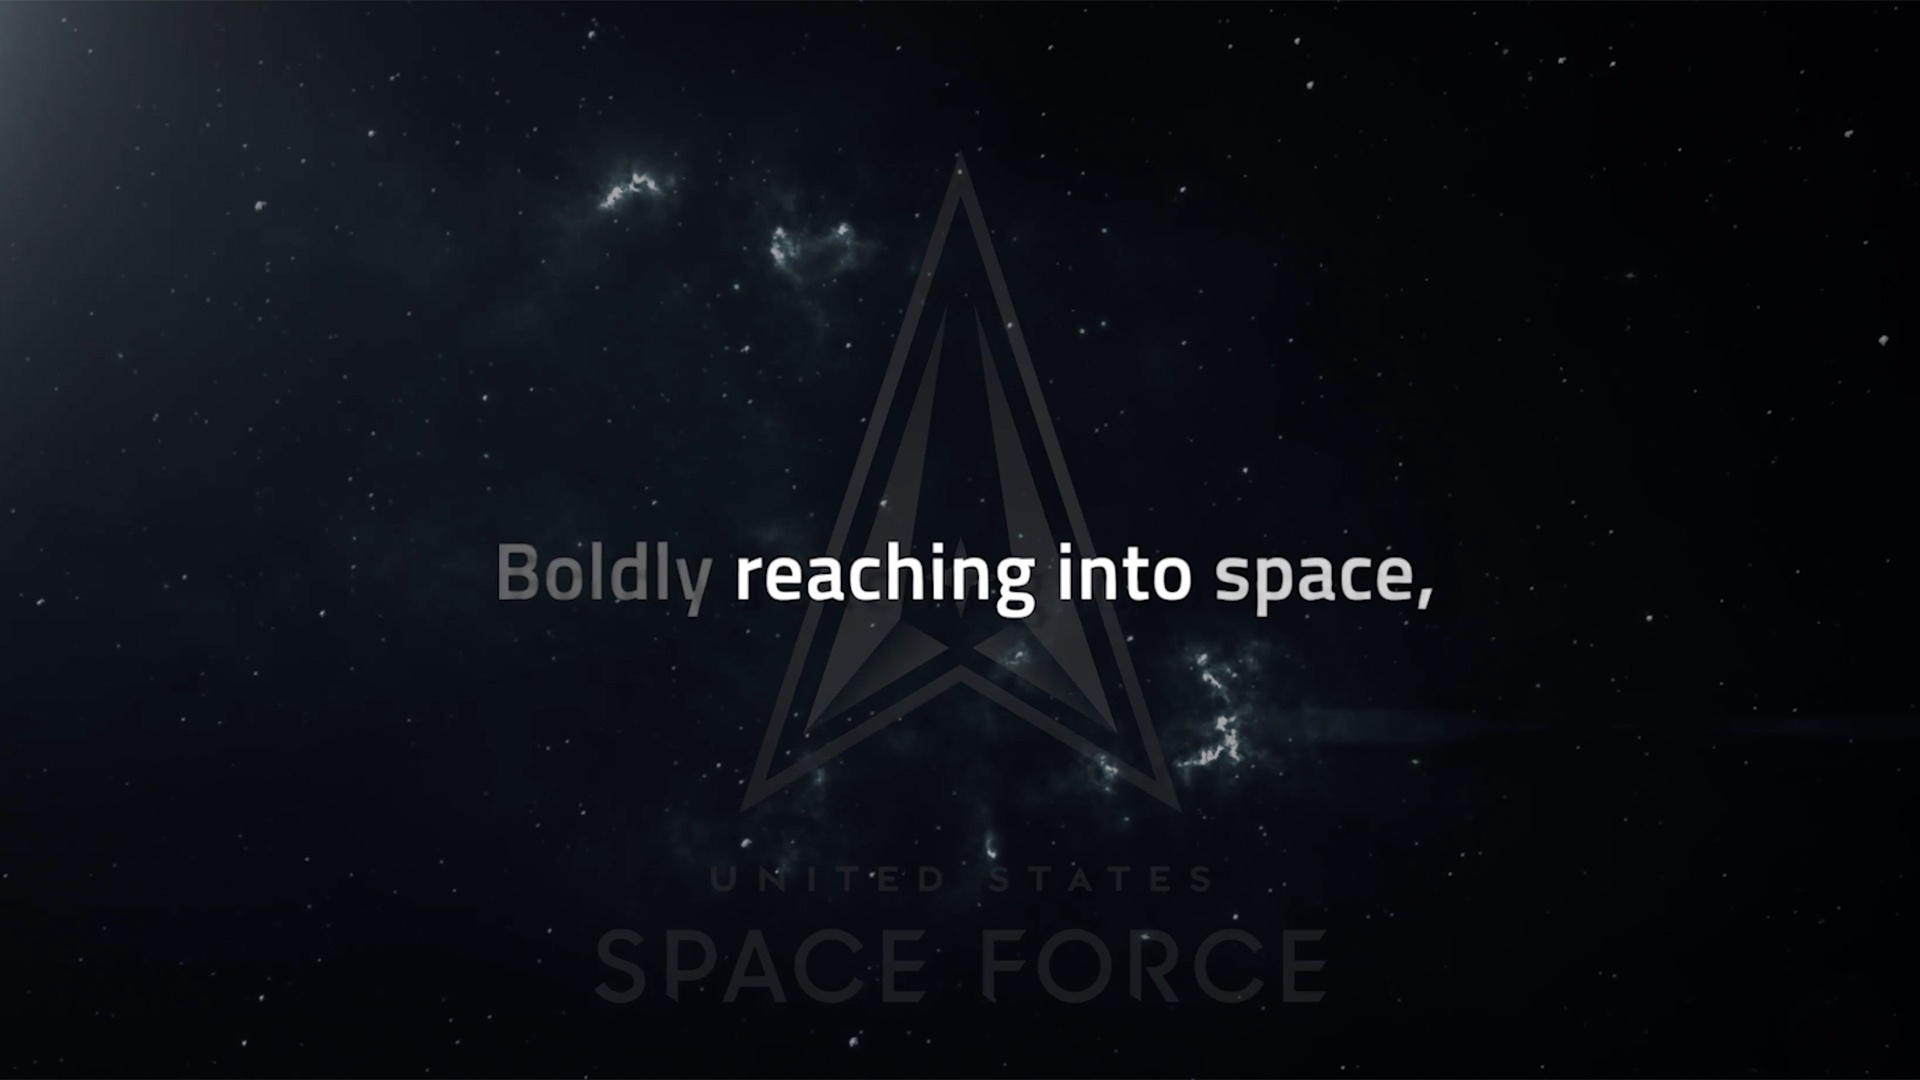 A screenshot of the Space Force song video.